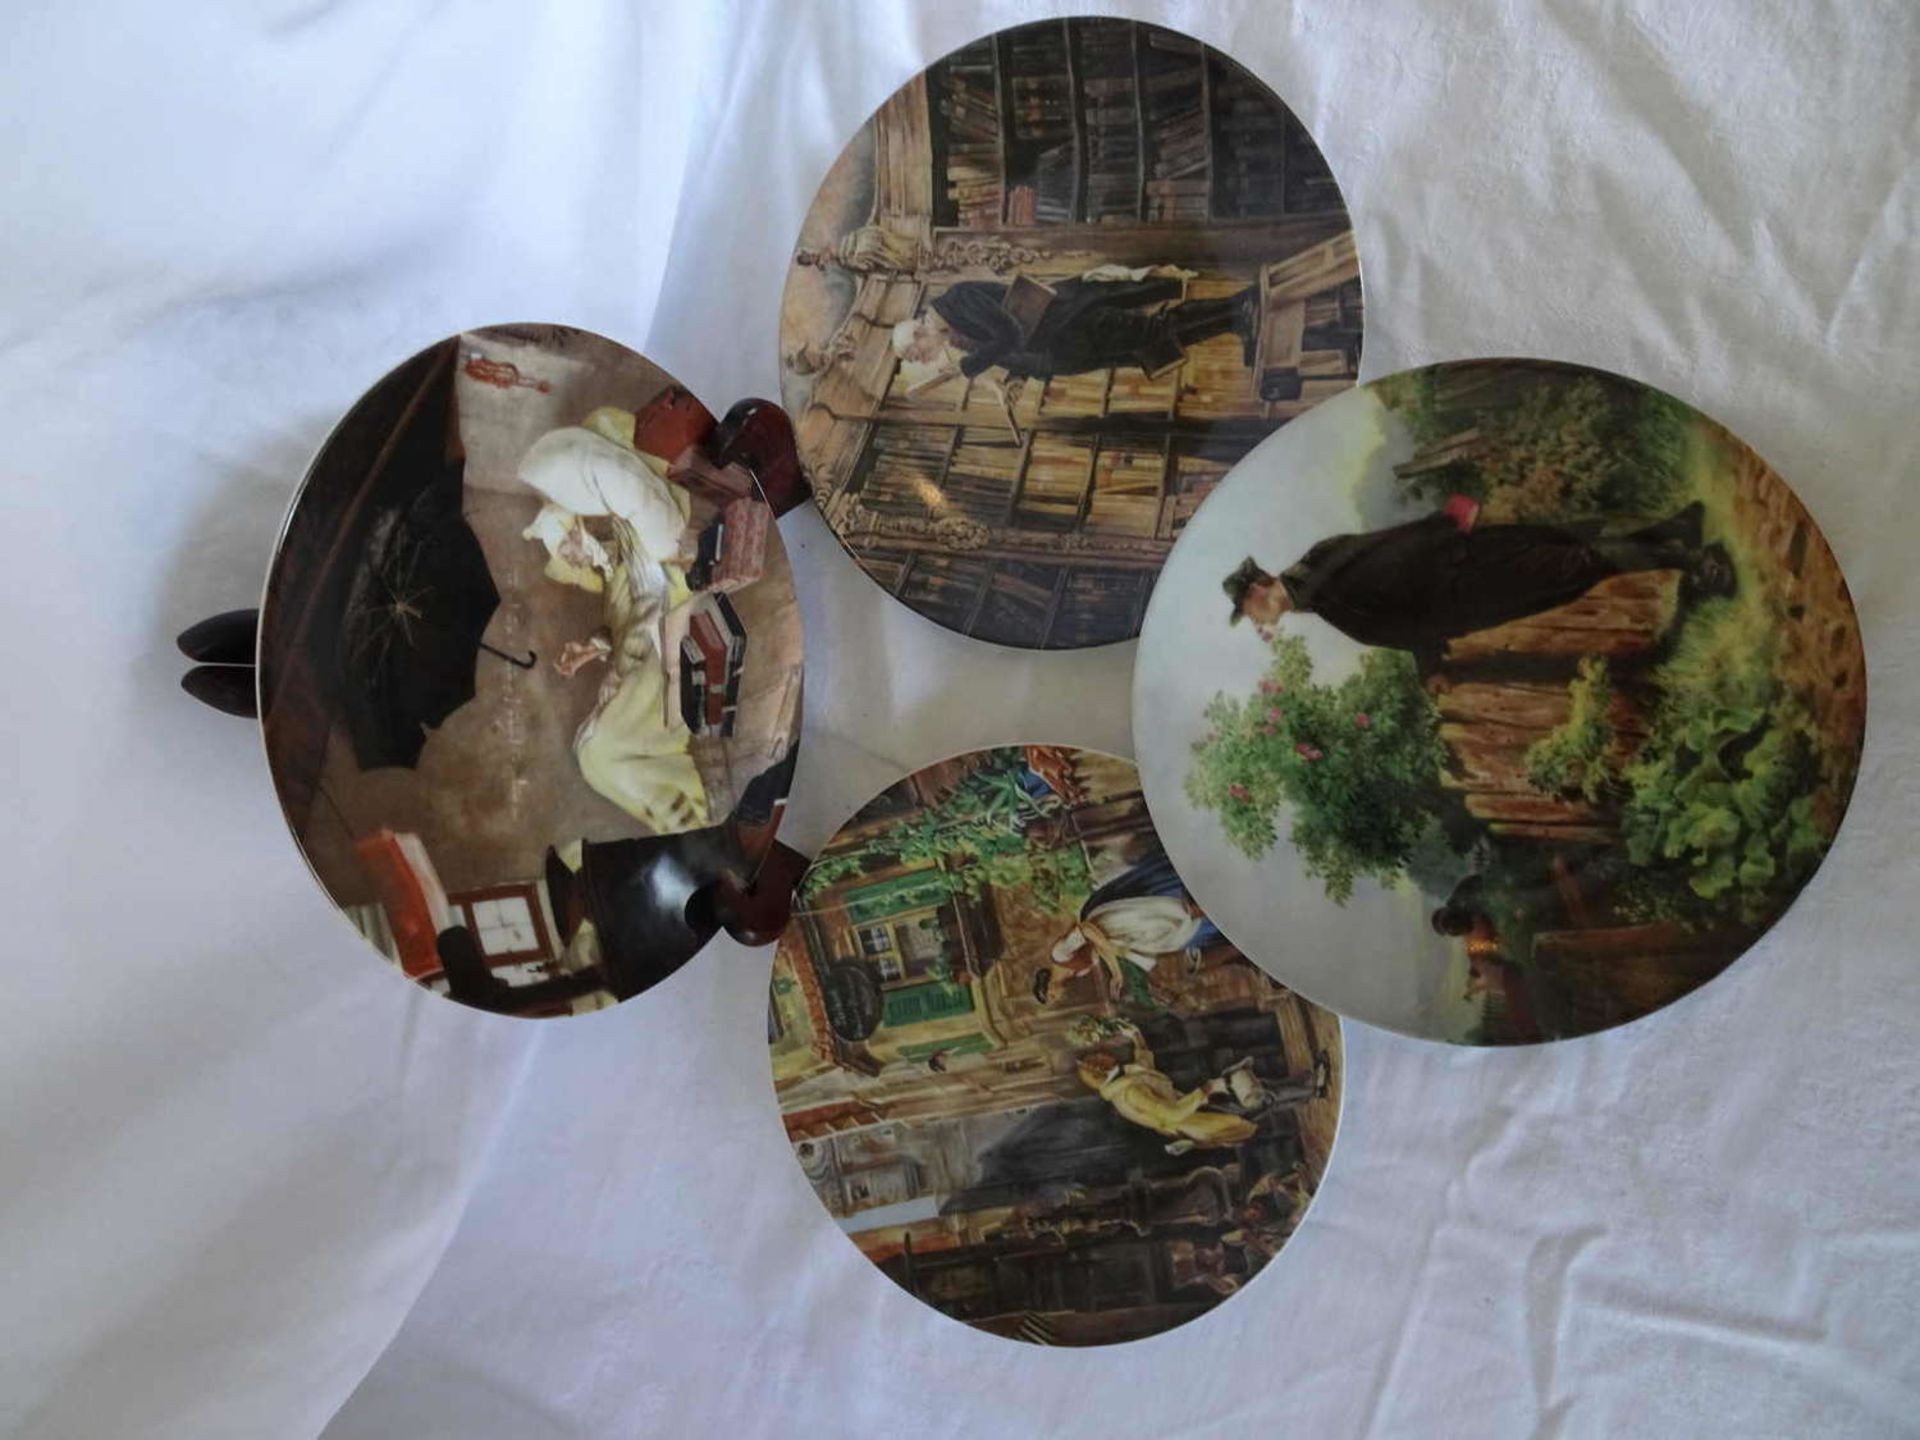 4 porcelain wall plates by Luisenburg Bavaria Germany, 1x "The Bookworm", 1x "The Eternal